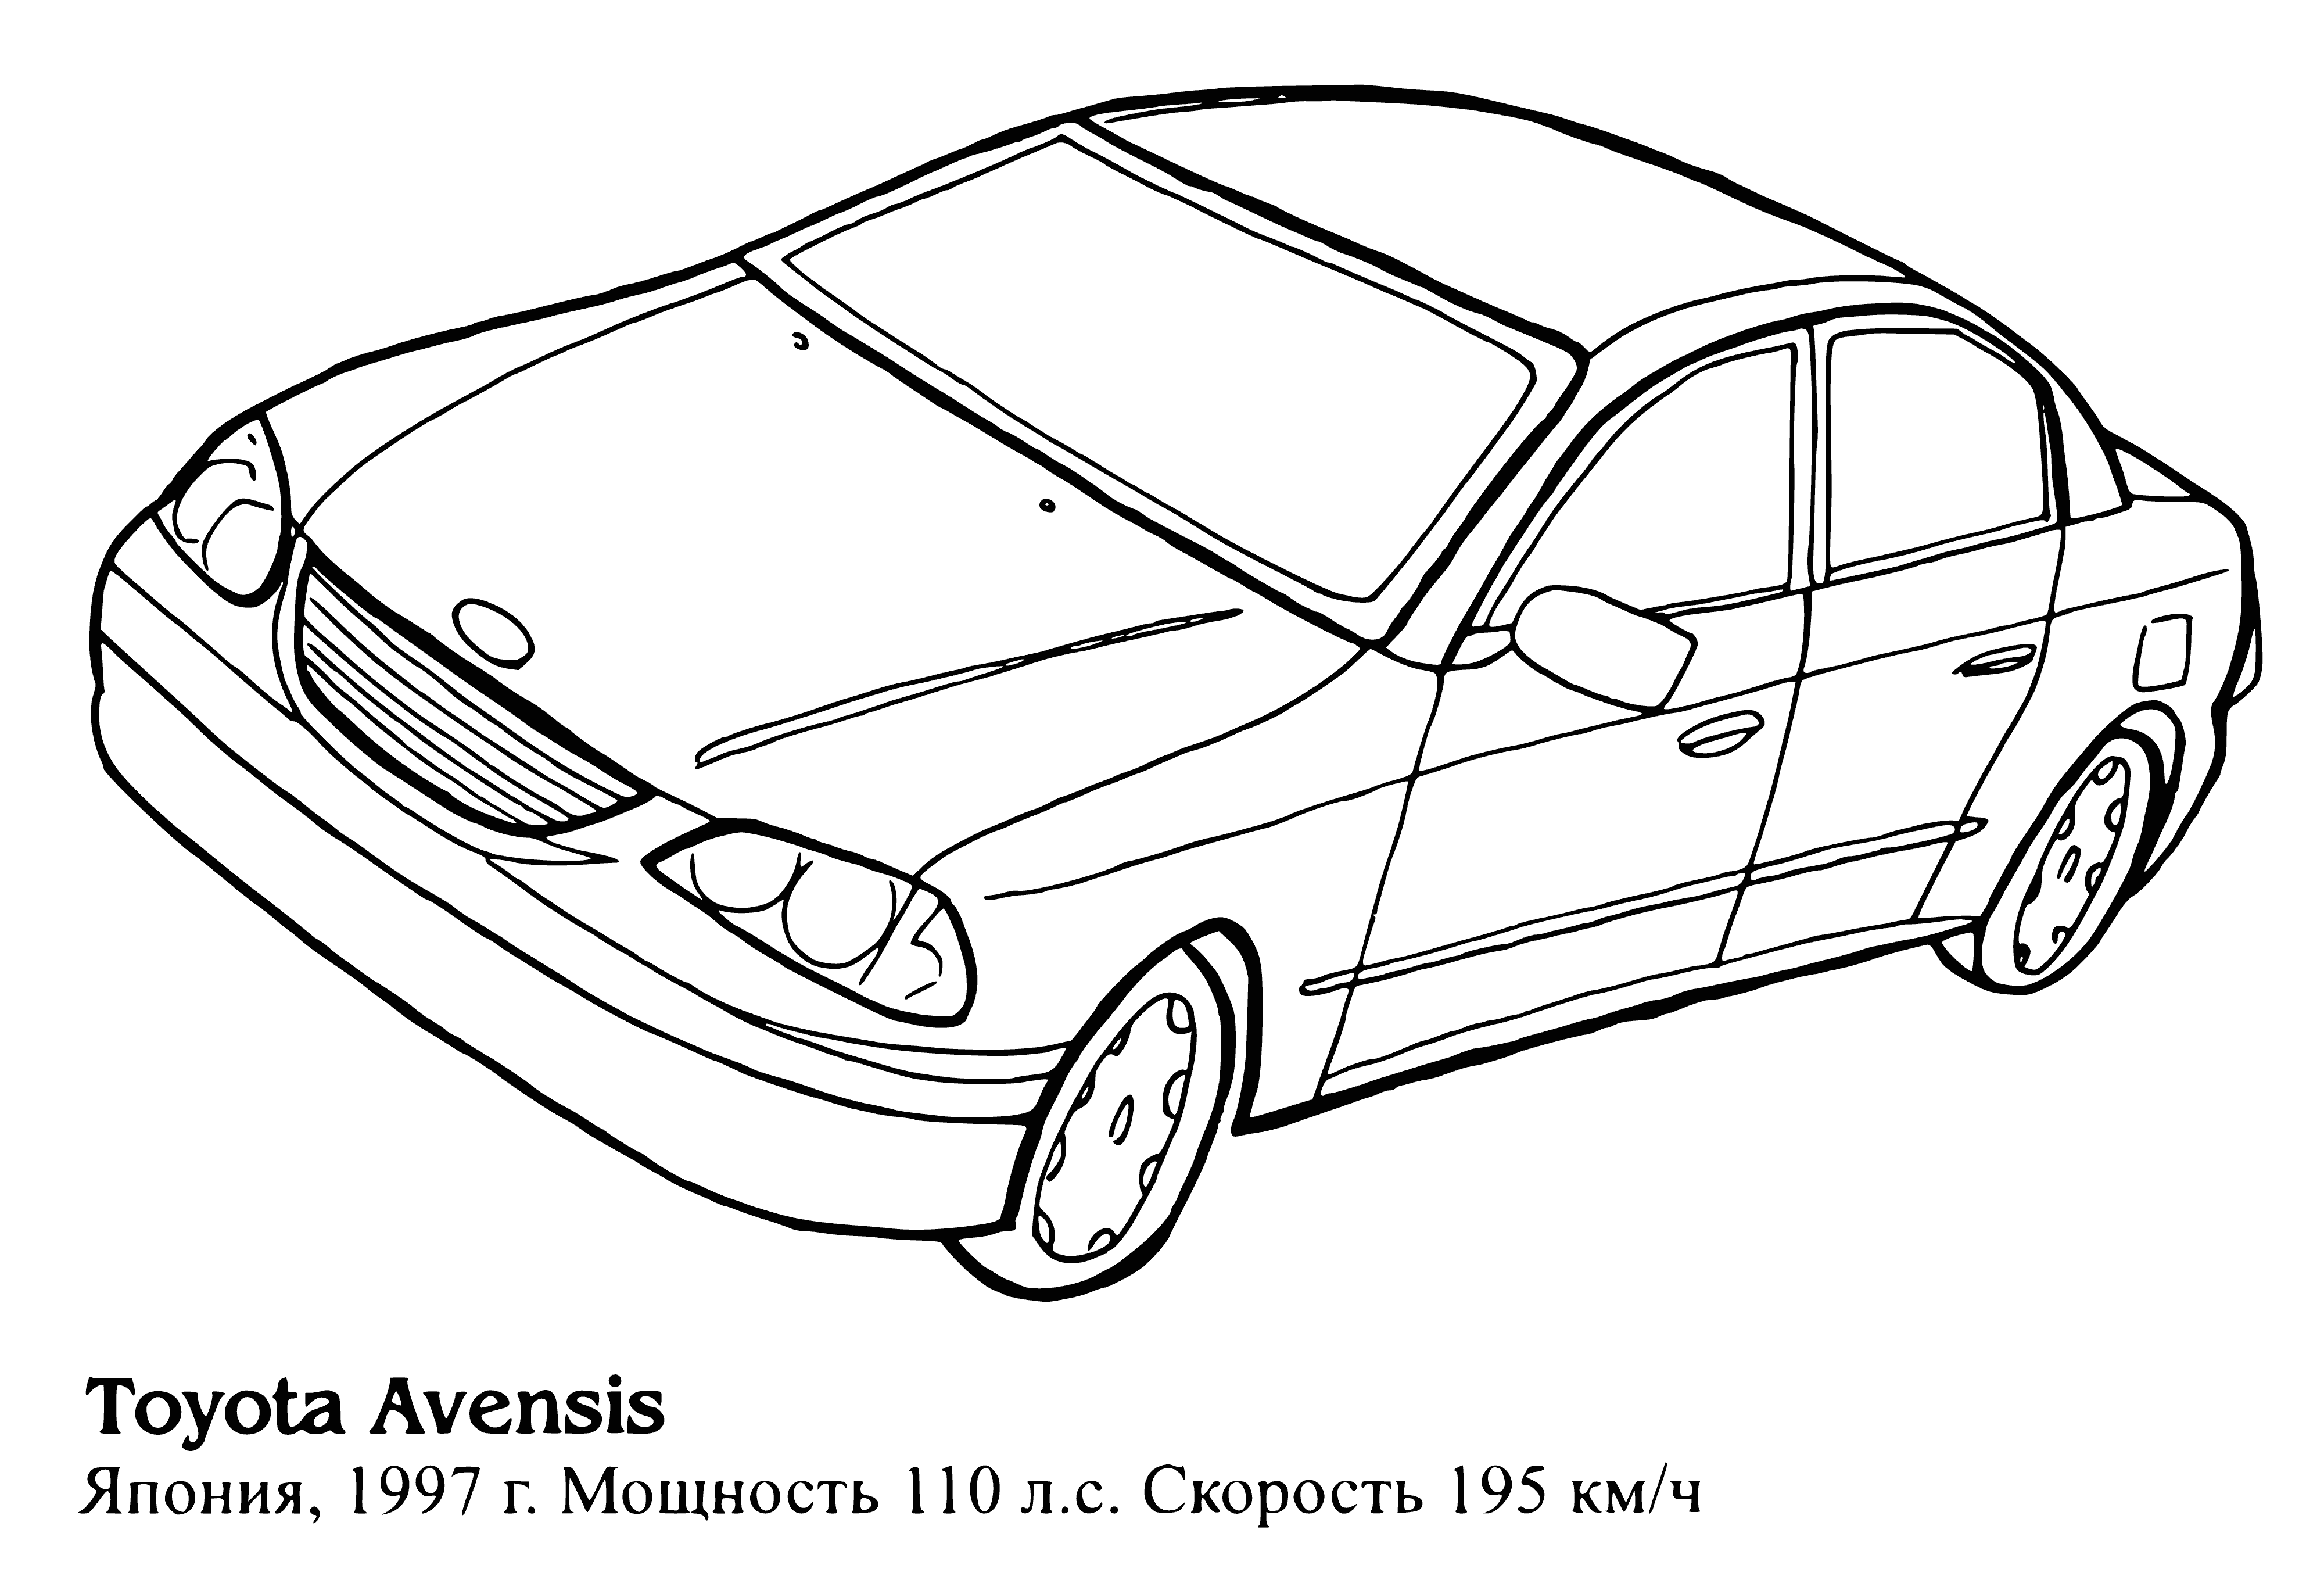 coloring page: Coloring page of silver Toyota Avensis with 4 doors & trunk, parked on road with headlights & taillights.